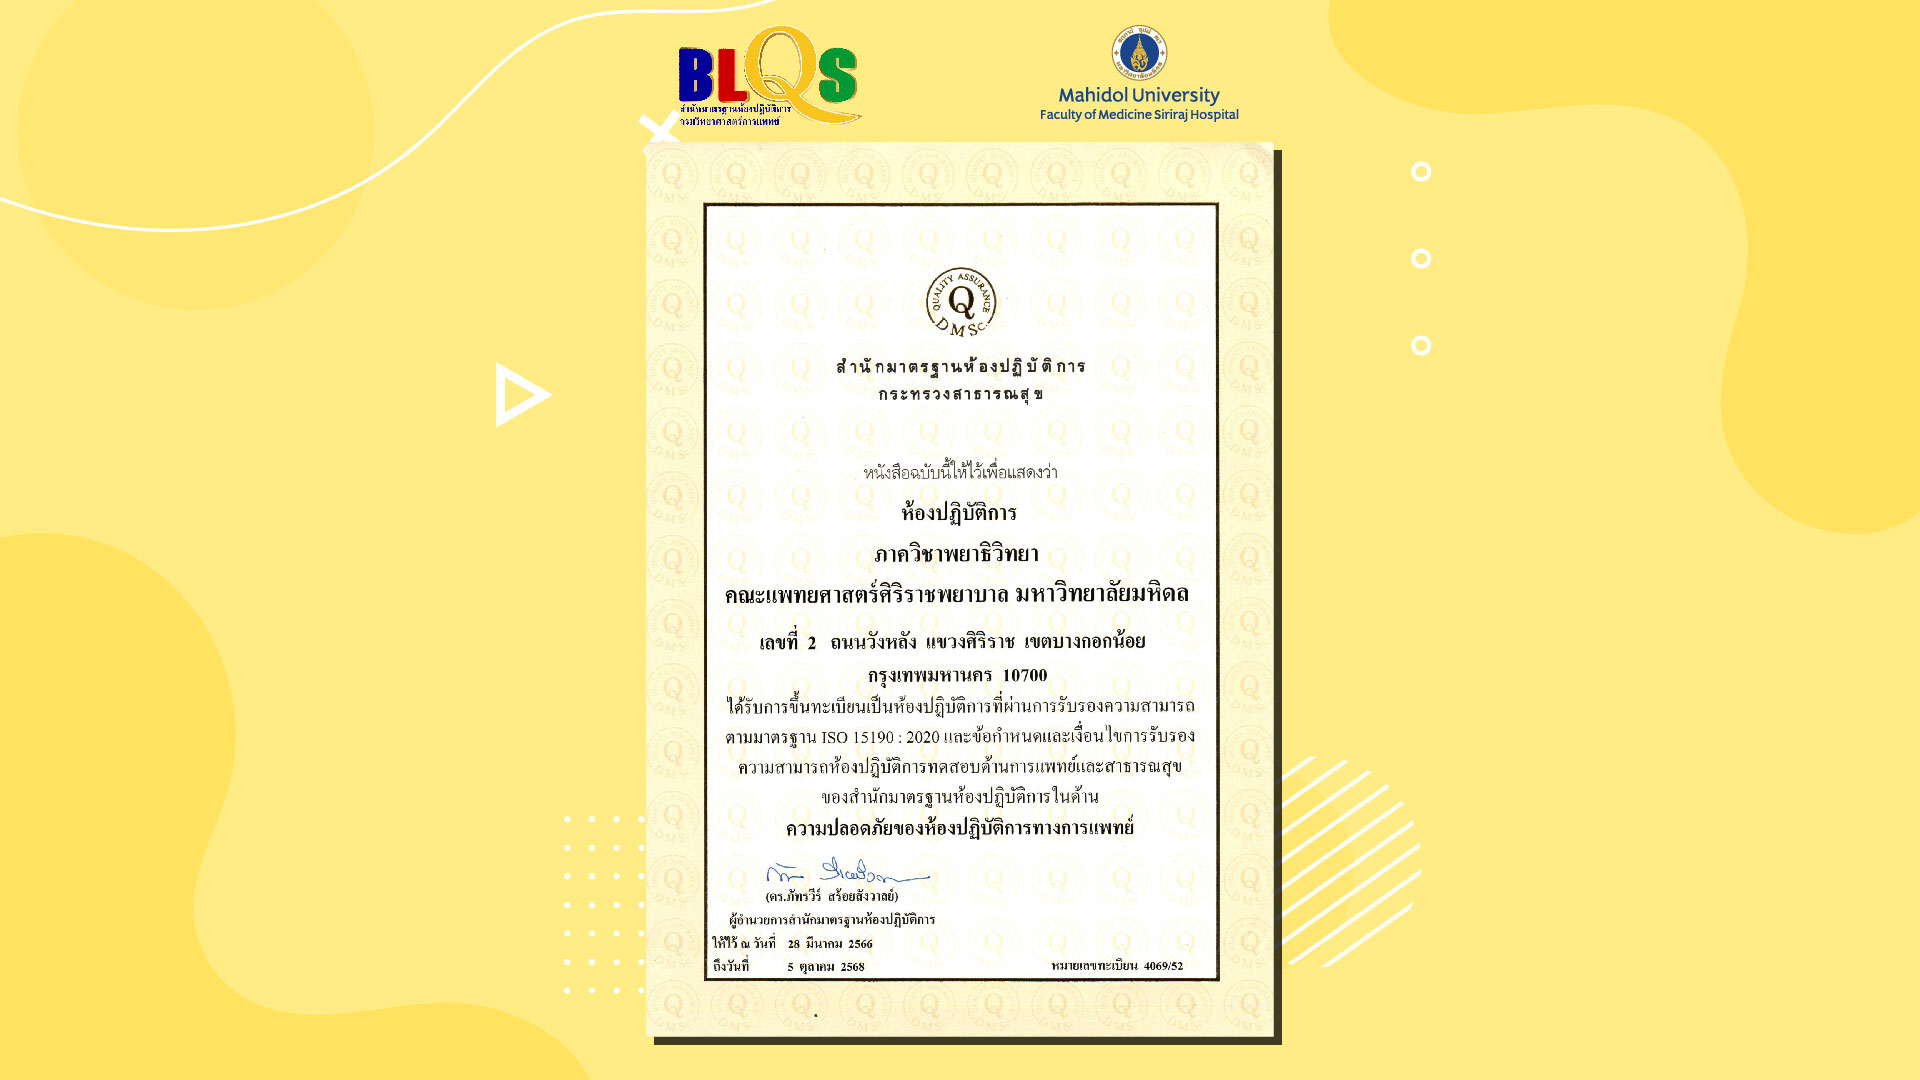 Siriraj Pathology Received the Laboratory Safety Accreditation from the Ministry of Public Health